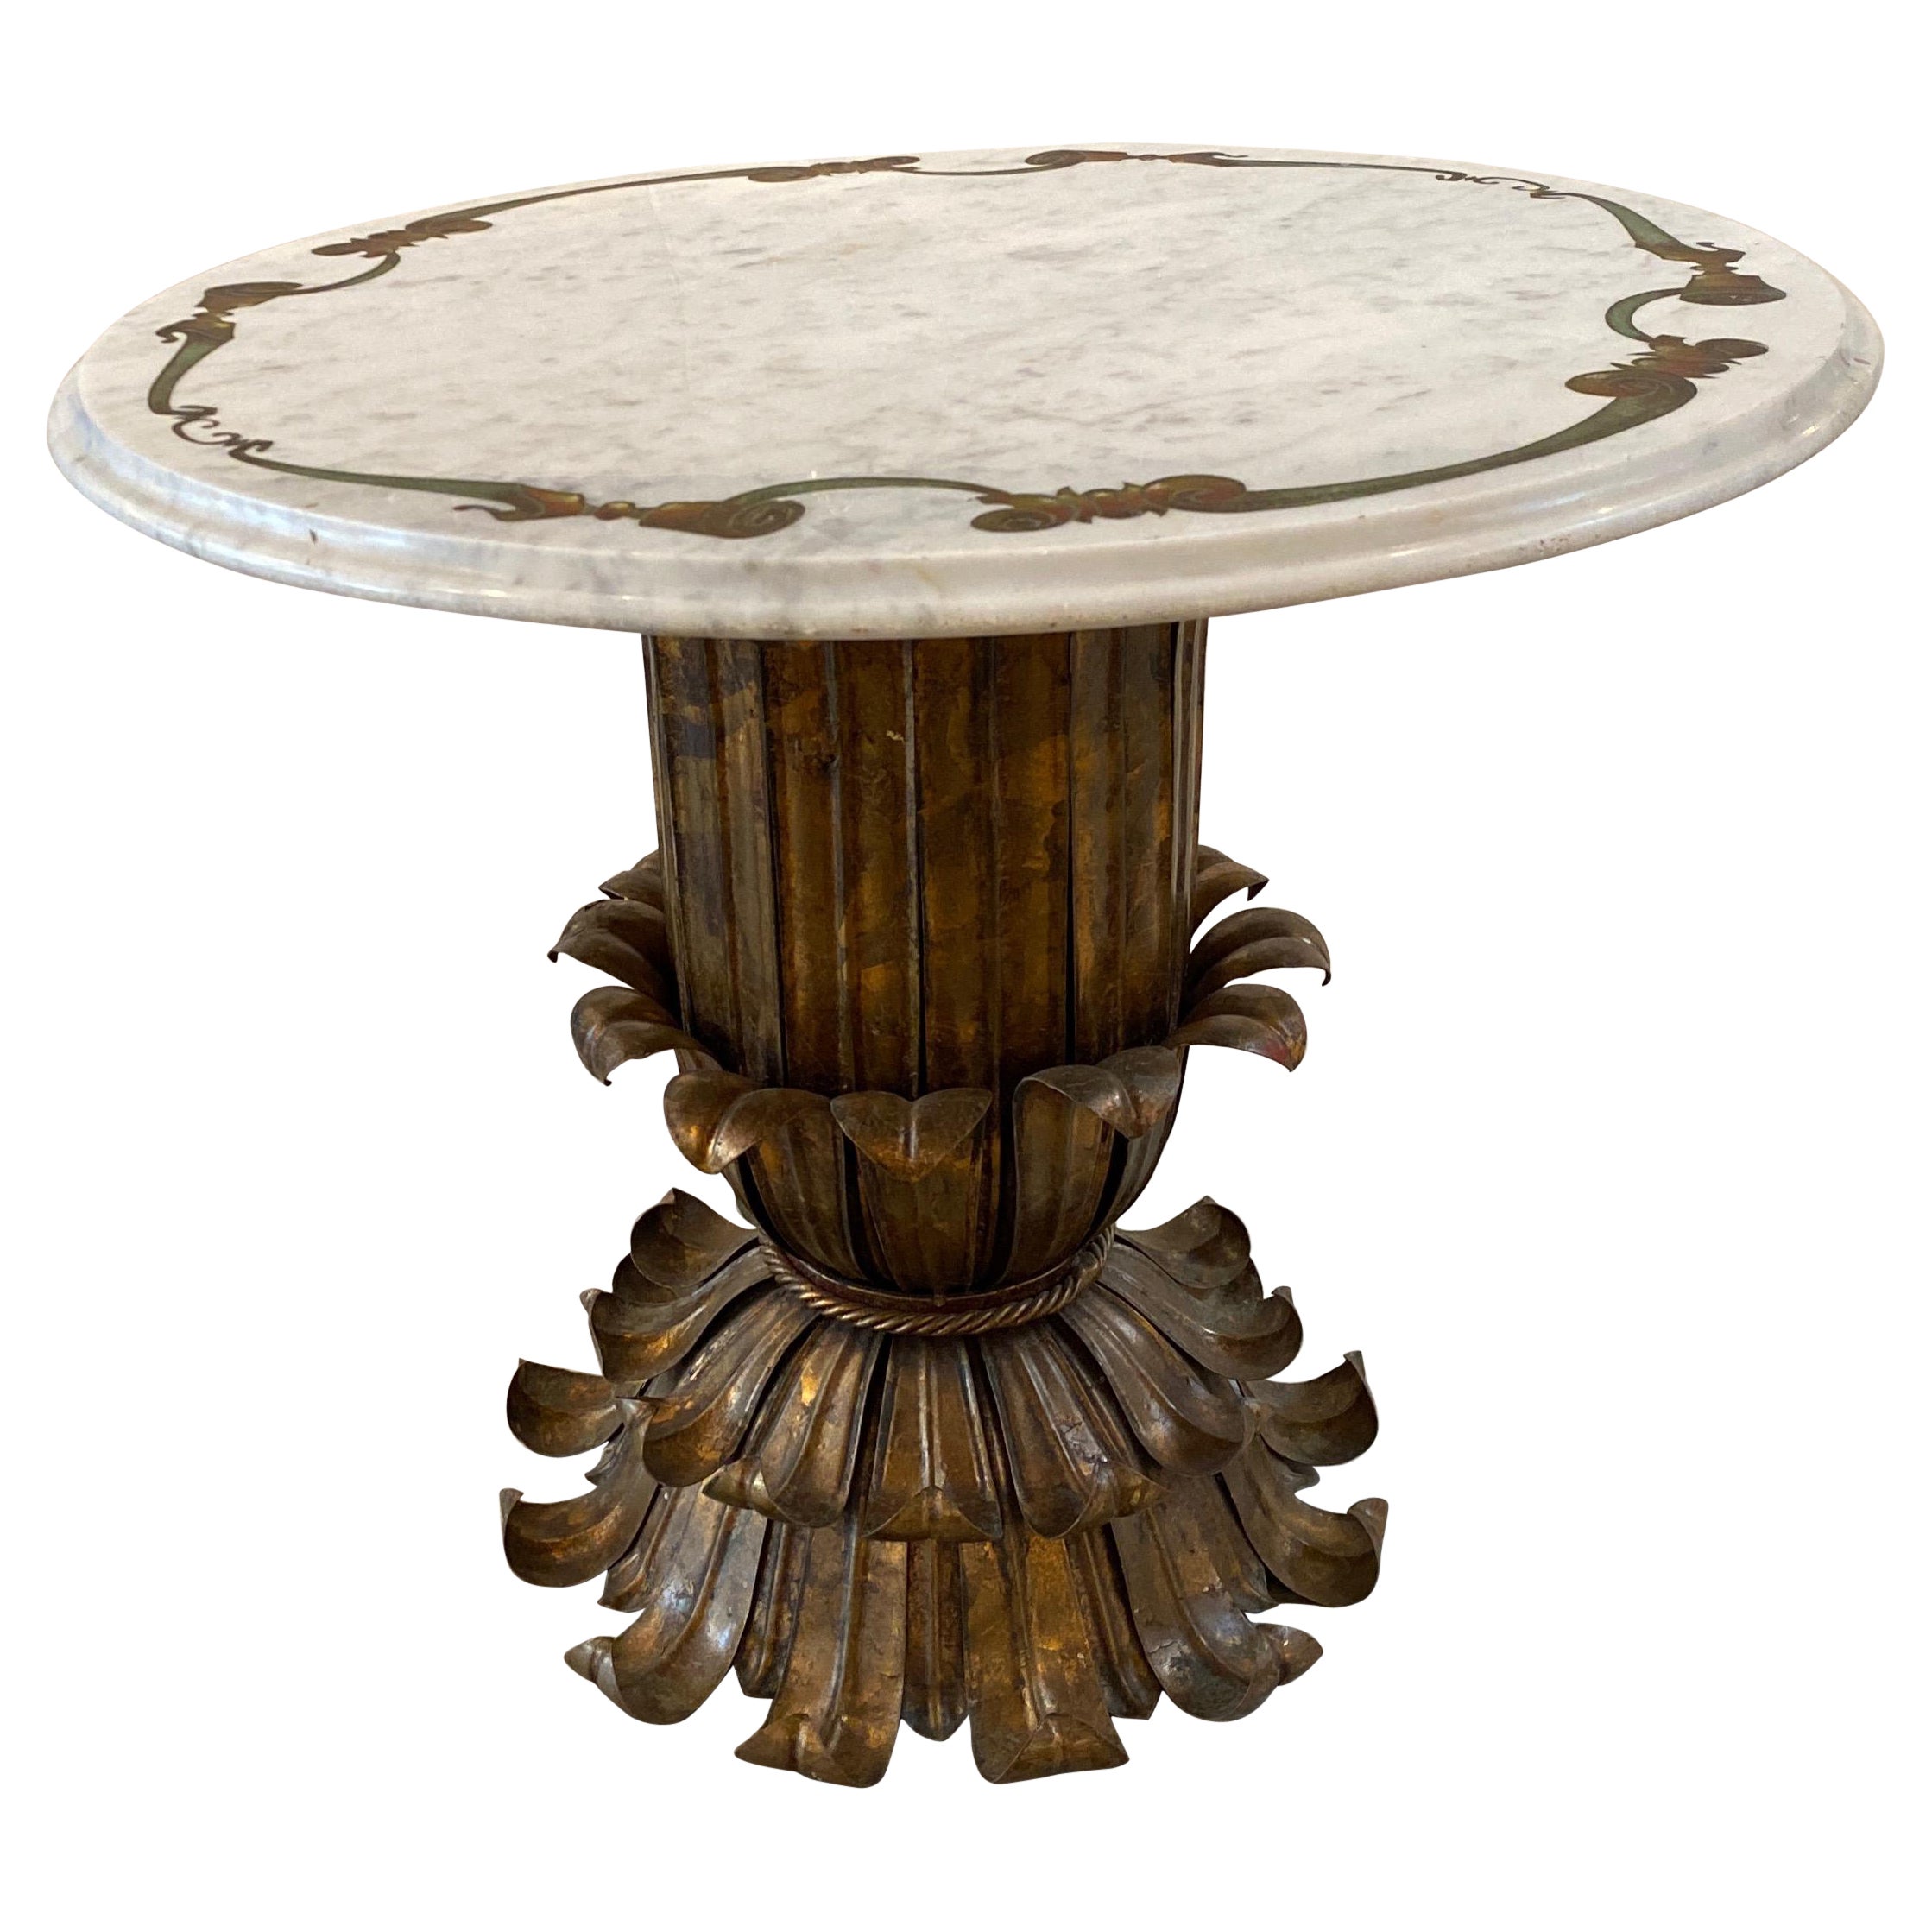 Hollywood Regency Italian Marble and Gilt Metal Side Table 